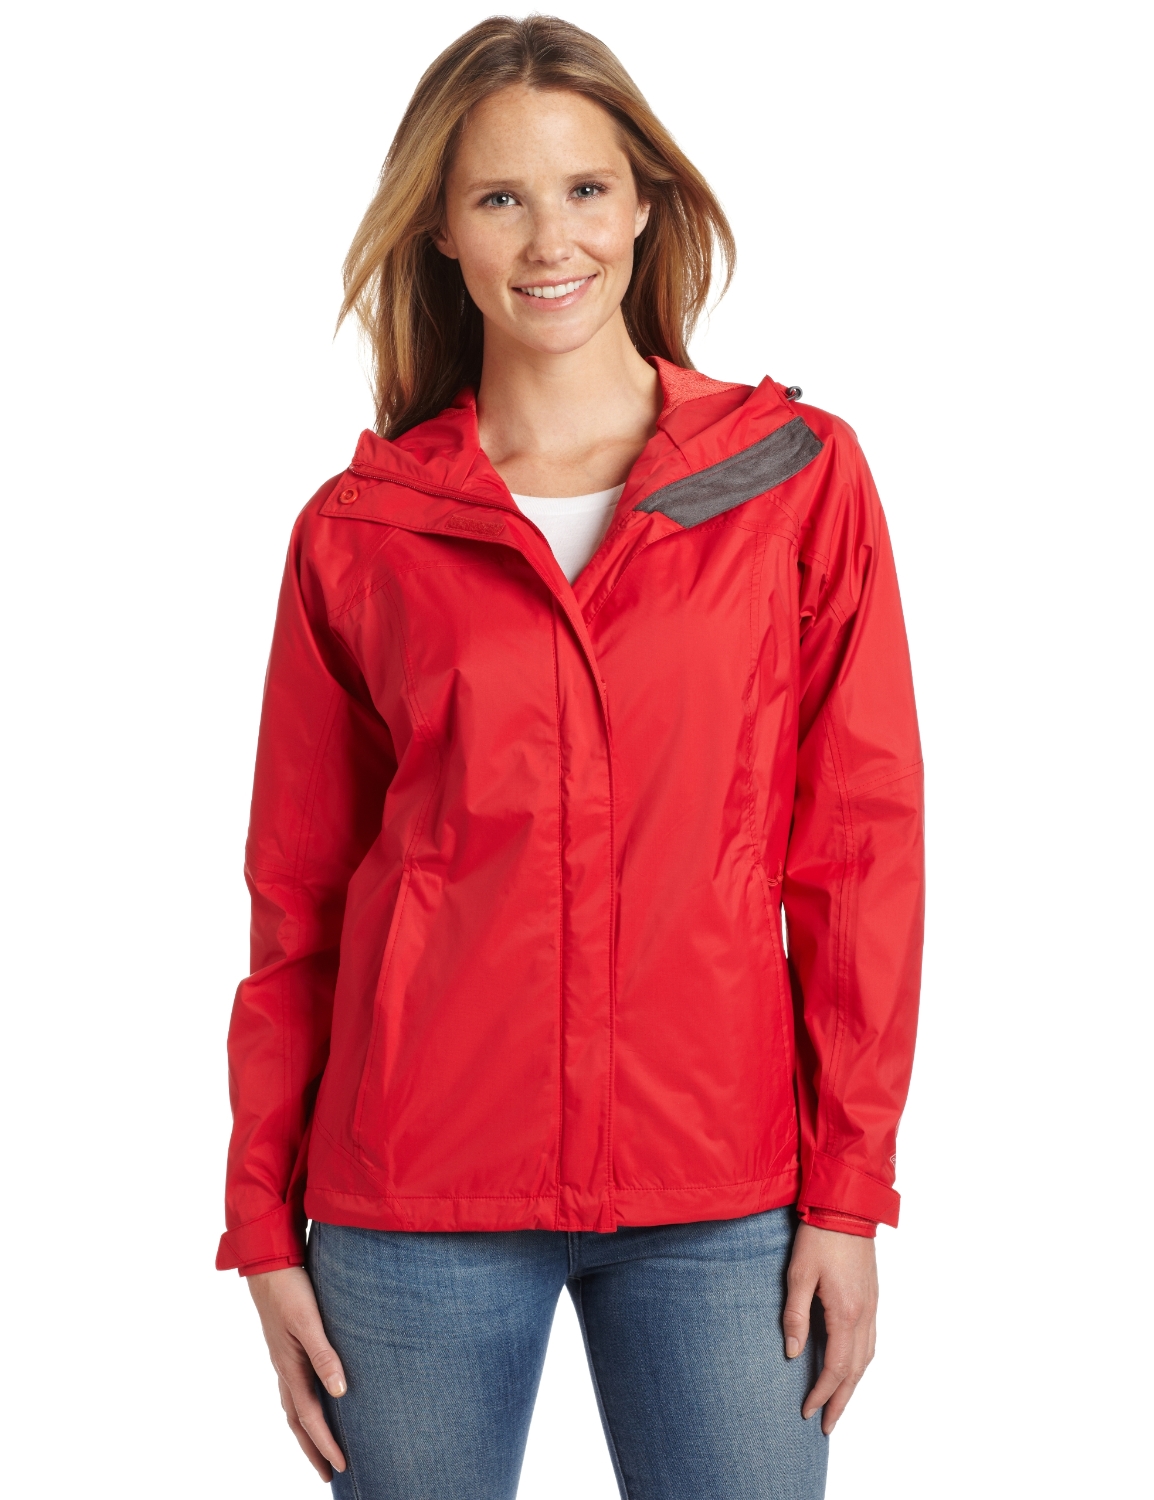 COLUMBIA WOMEN'S ARCADIA RAIN JACKET CHEAPEST PRICE SALE WITH FREE SHIPPING